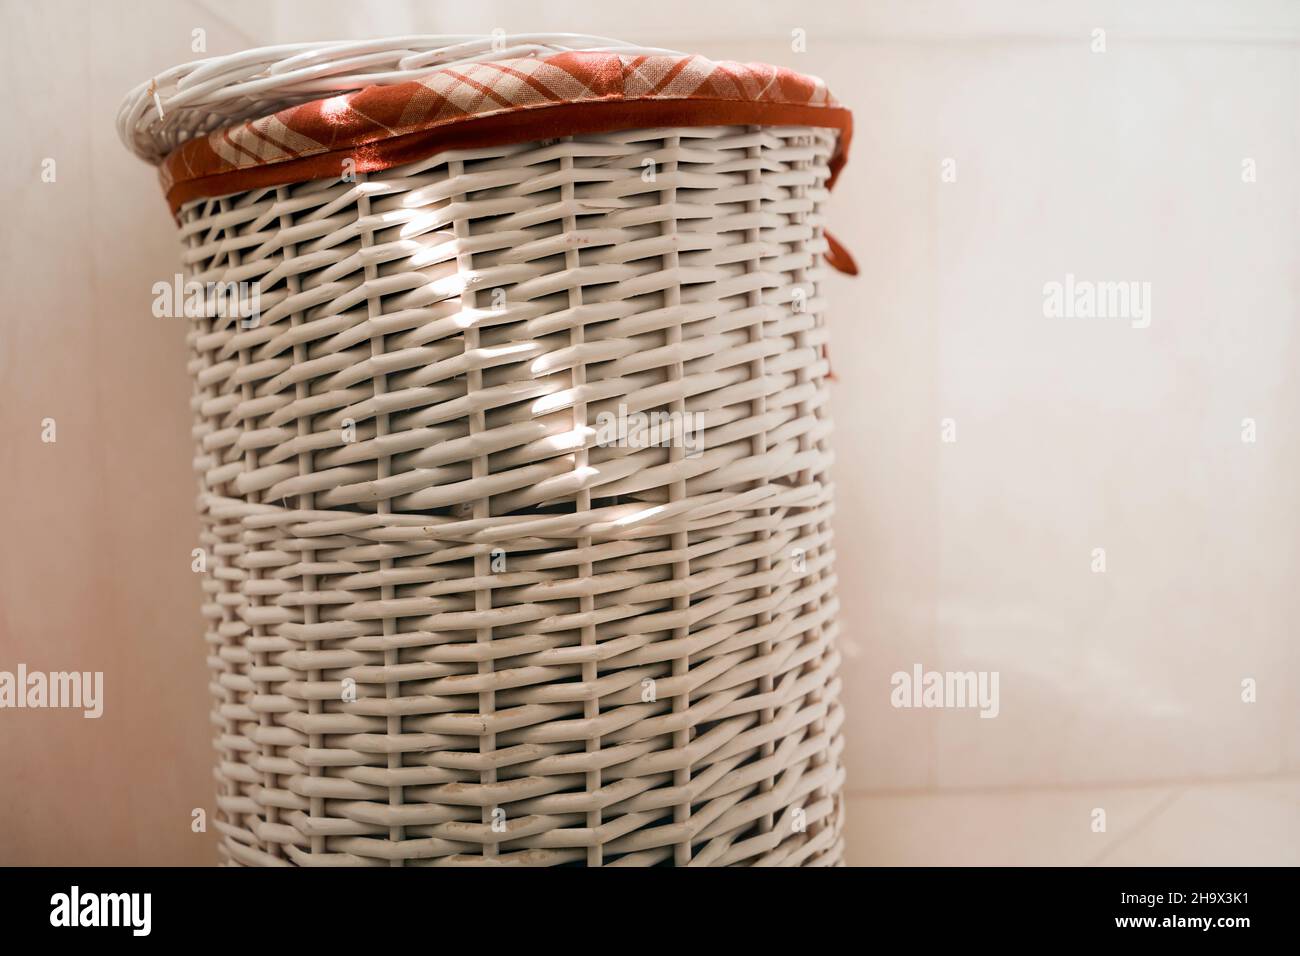 Wooden laundry basket in the bathroom. Stock Photo